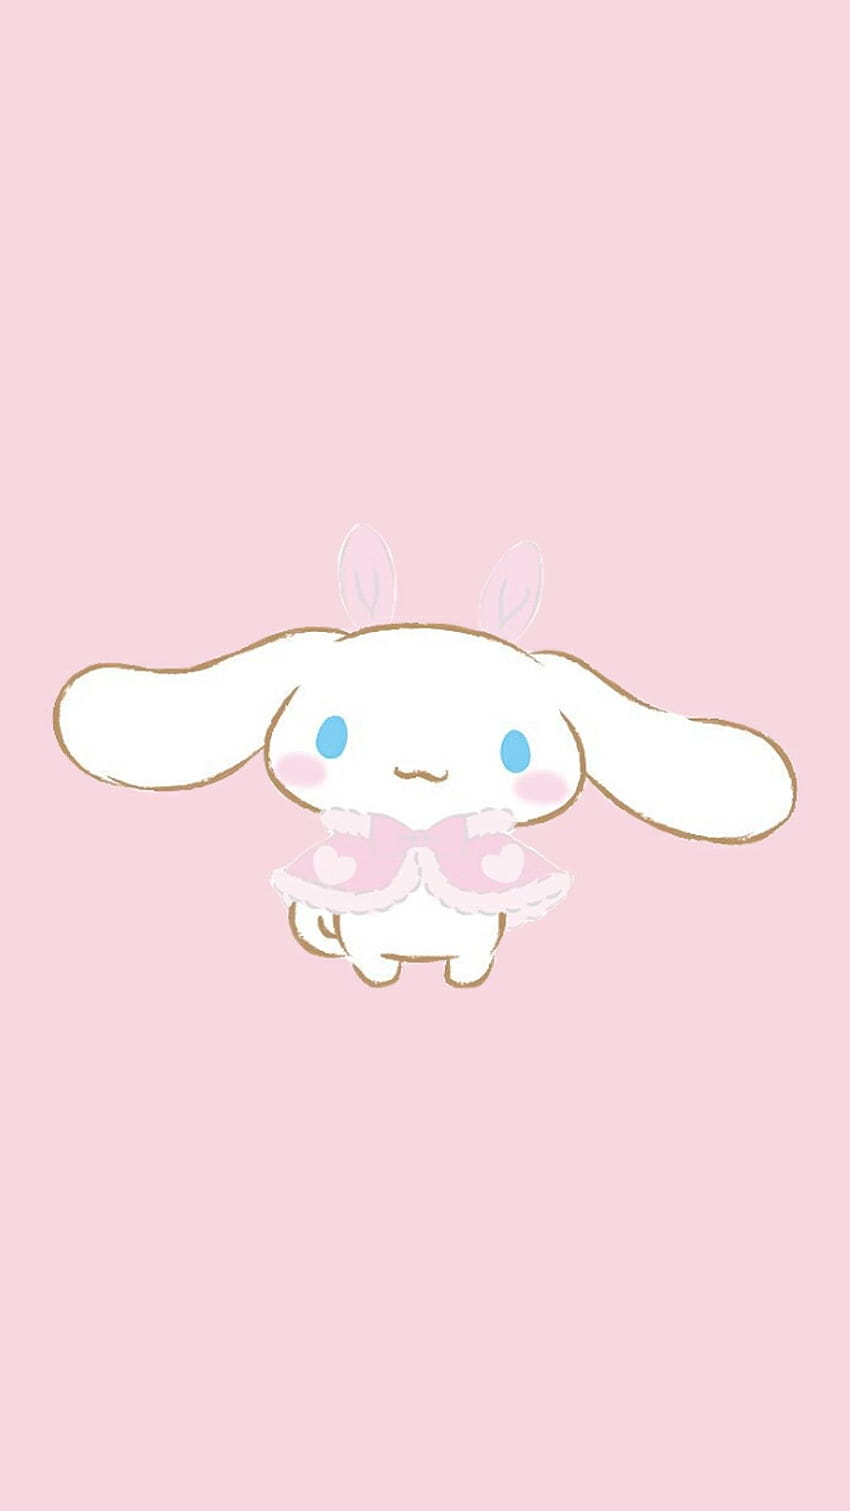 cinnamon roll from hello kitty wallpaper for your phoneTikTok Search